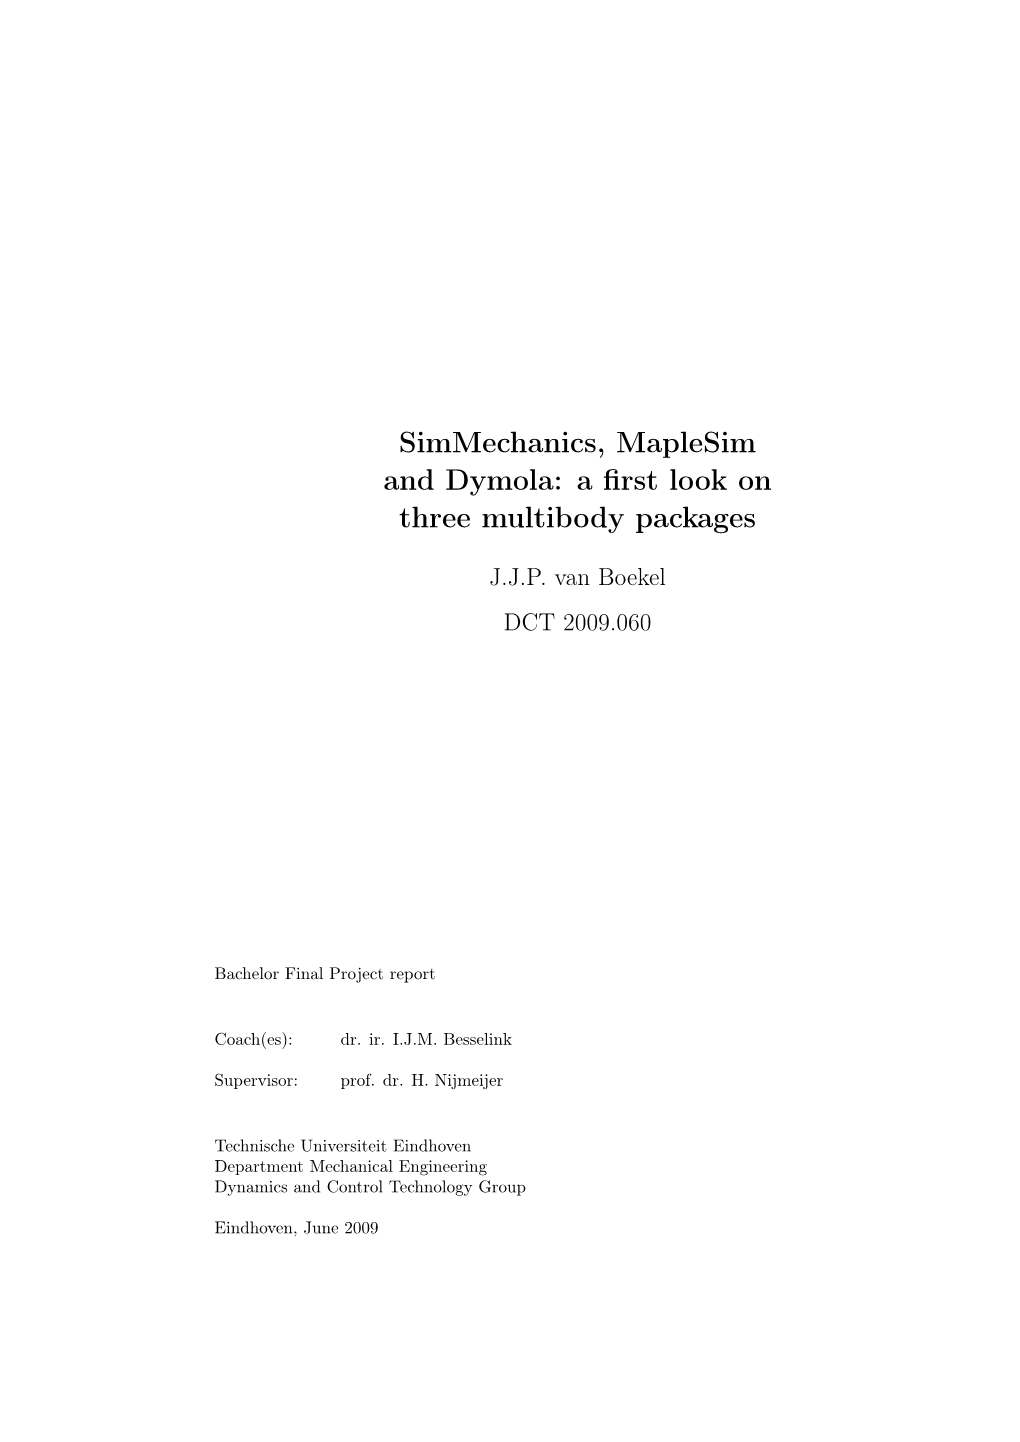 Simmechanics, Maplesim and Dymola: a ﬁrst Look on Three Multibody Packages